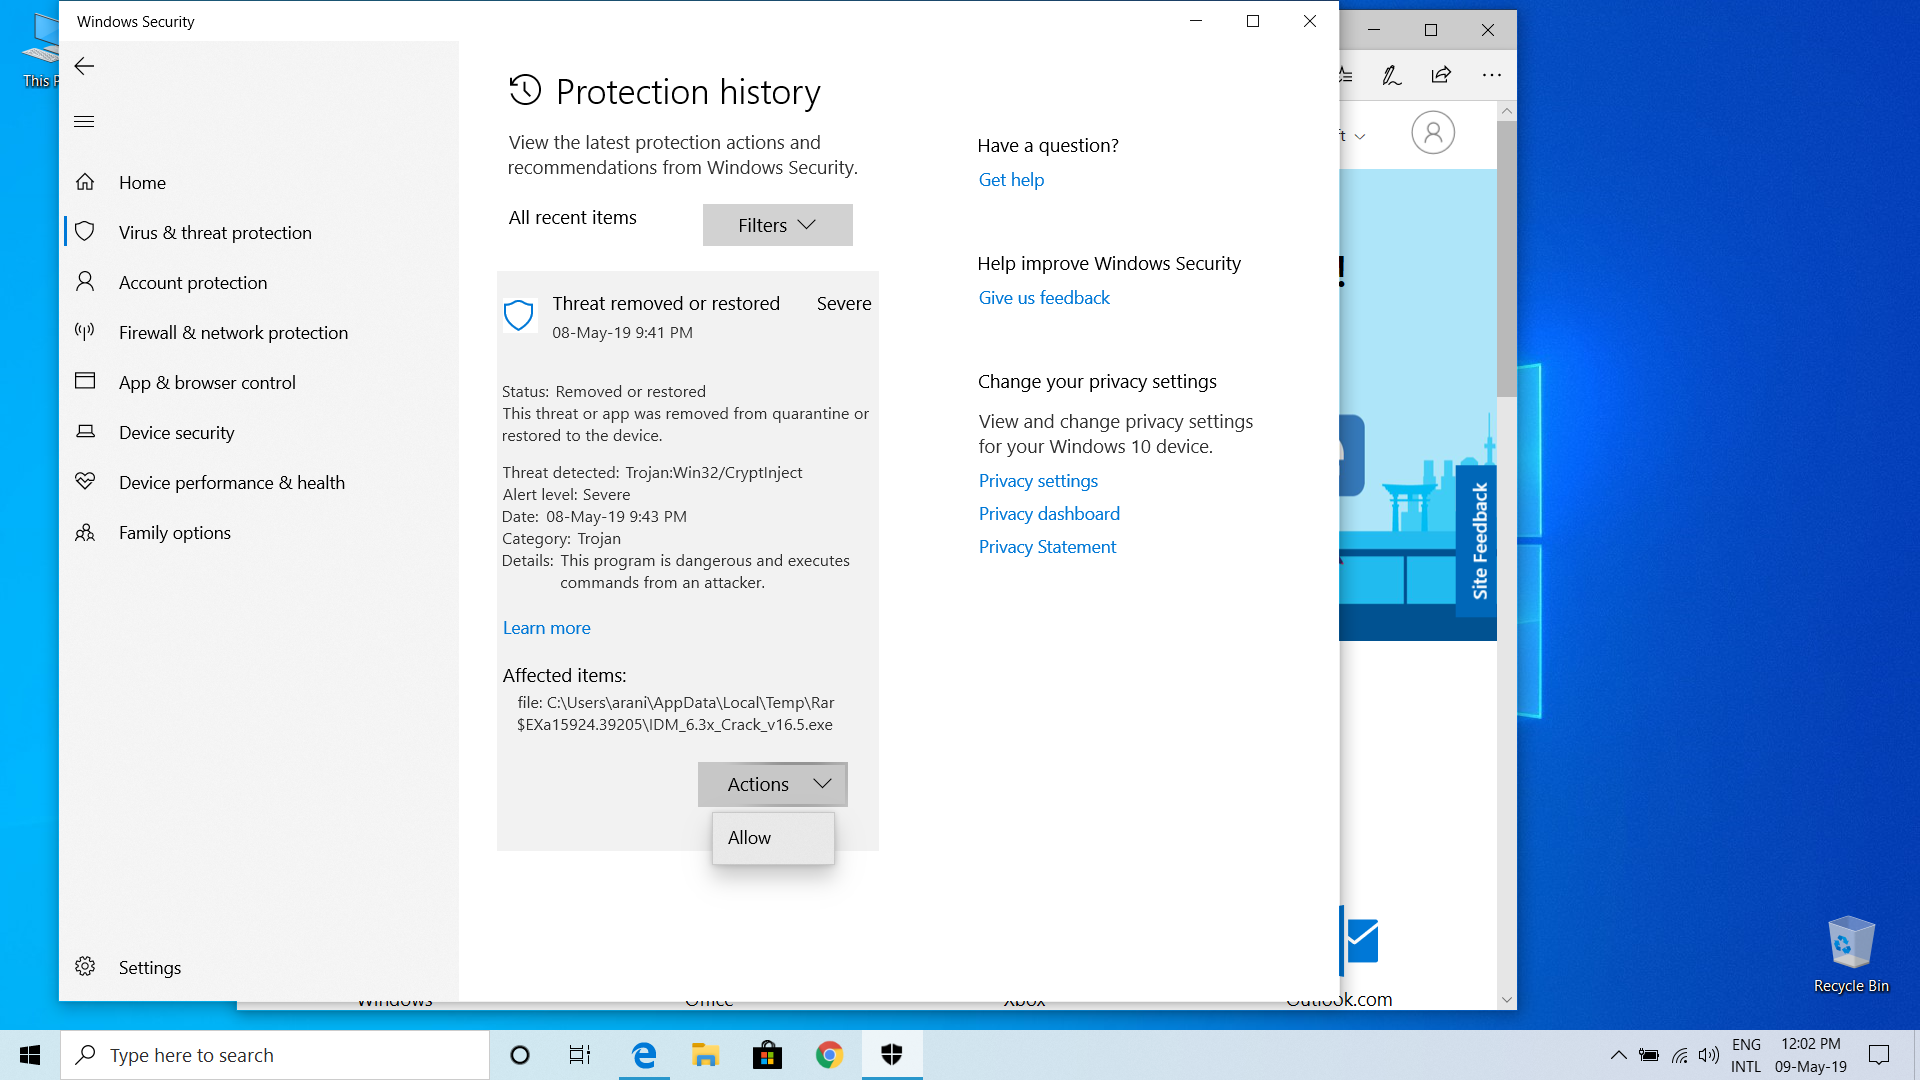 Unable to clear protection history manually in windows defender security center in Windows... 0c584b19-e560-410a-8d15-8e2fd3d983a1?upload=true.png